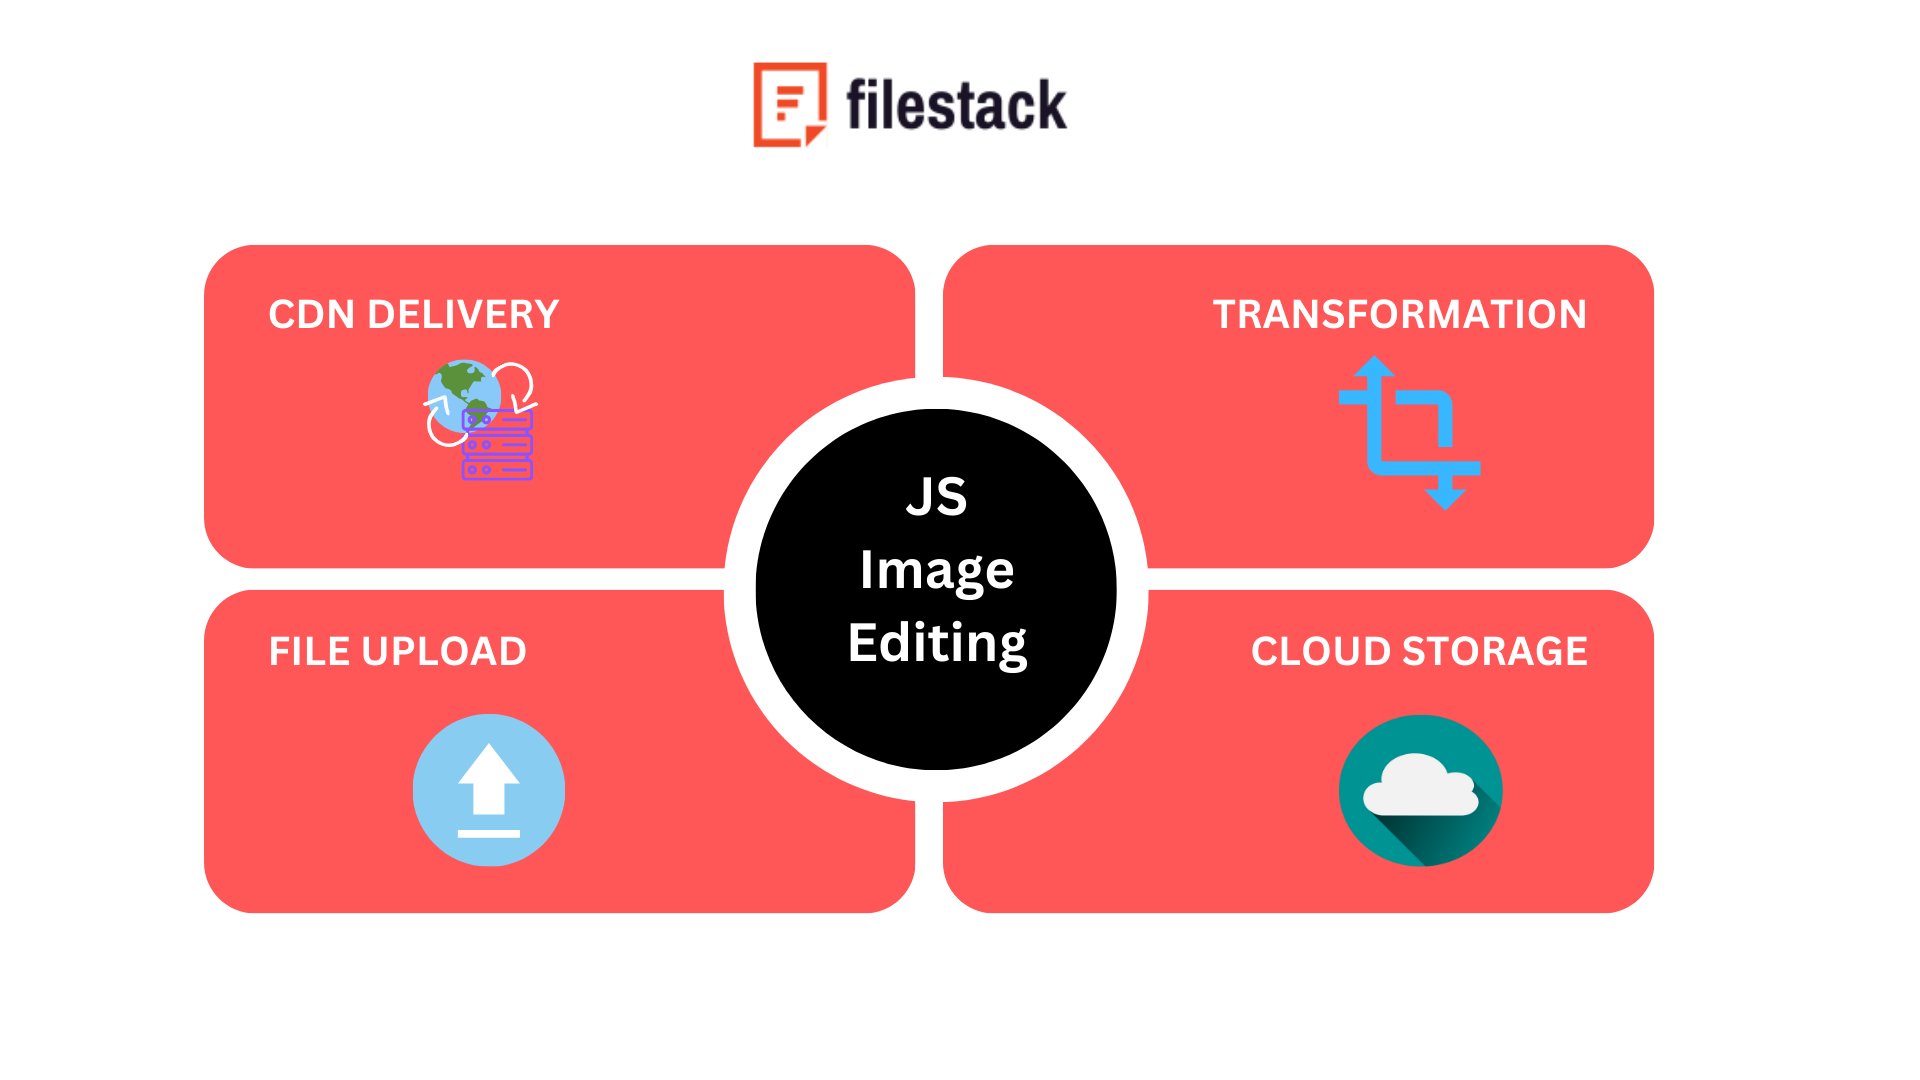 How can Filestack help you with file management and image editing